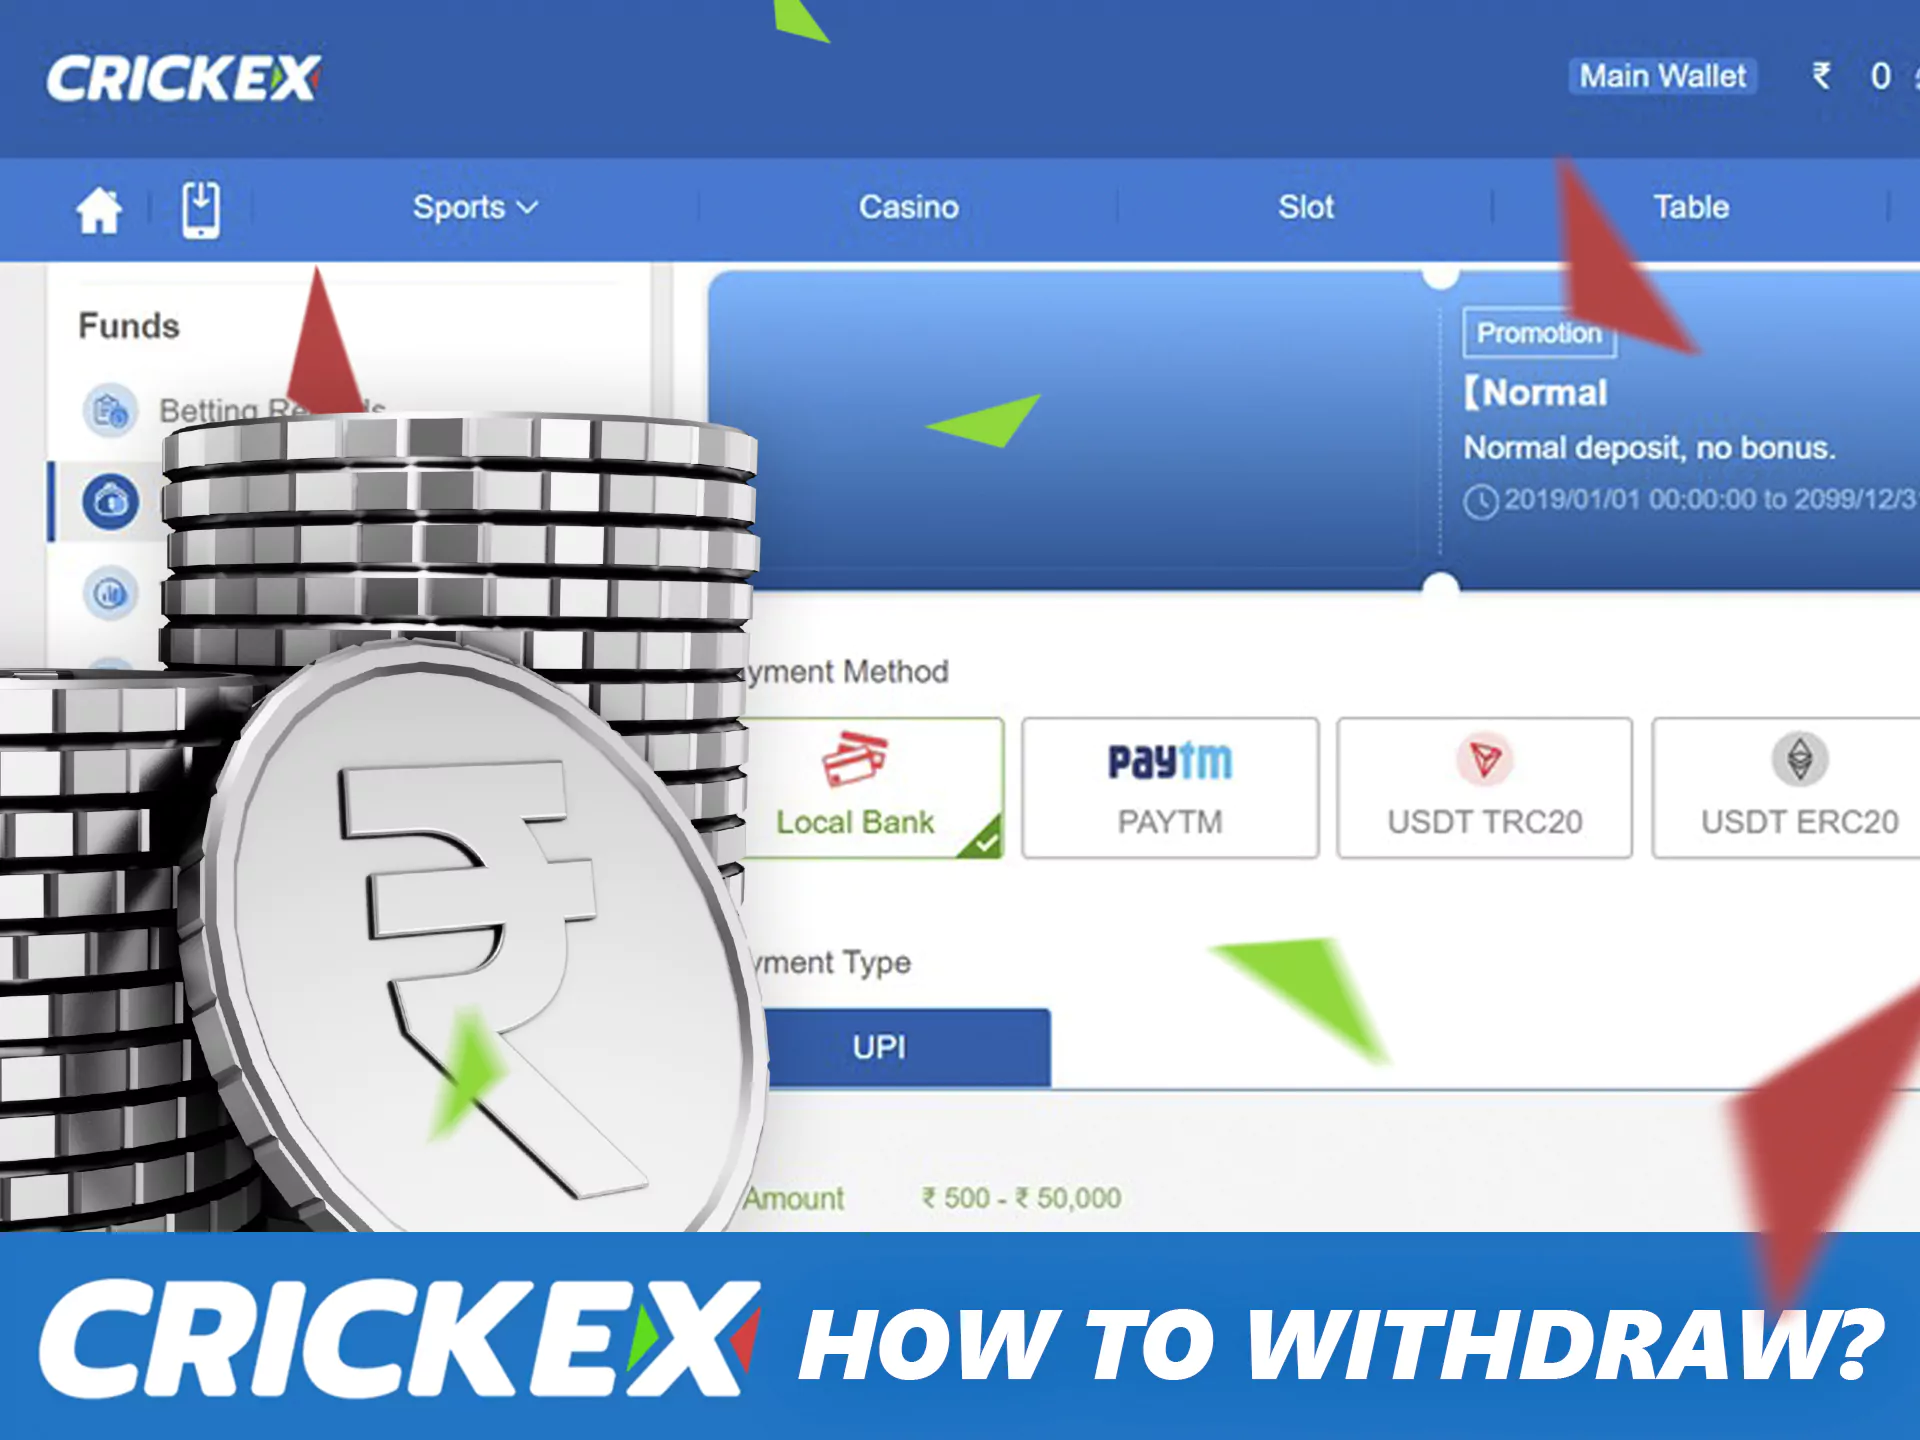 To withdraw from Crickex you need to verify your account.